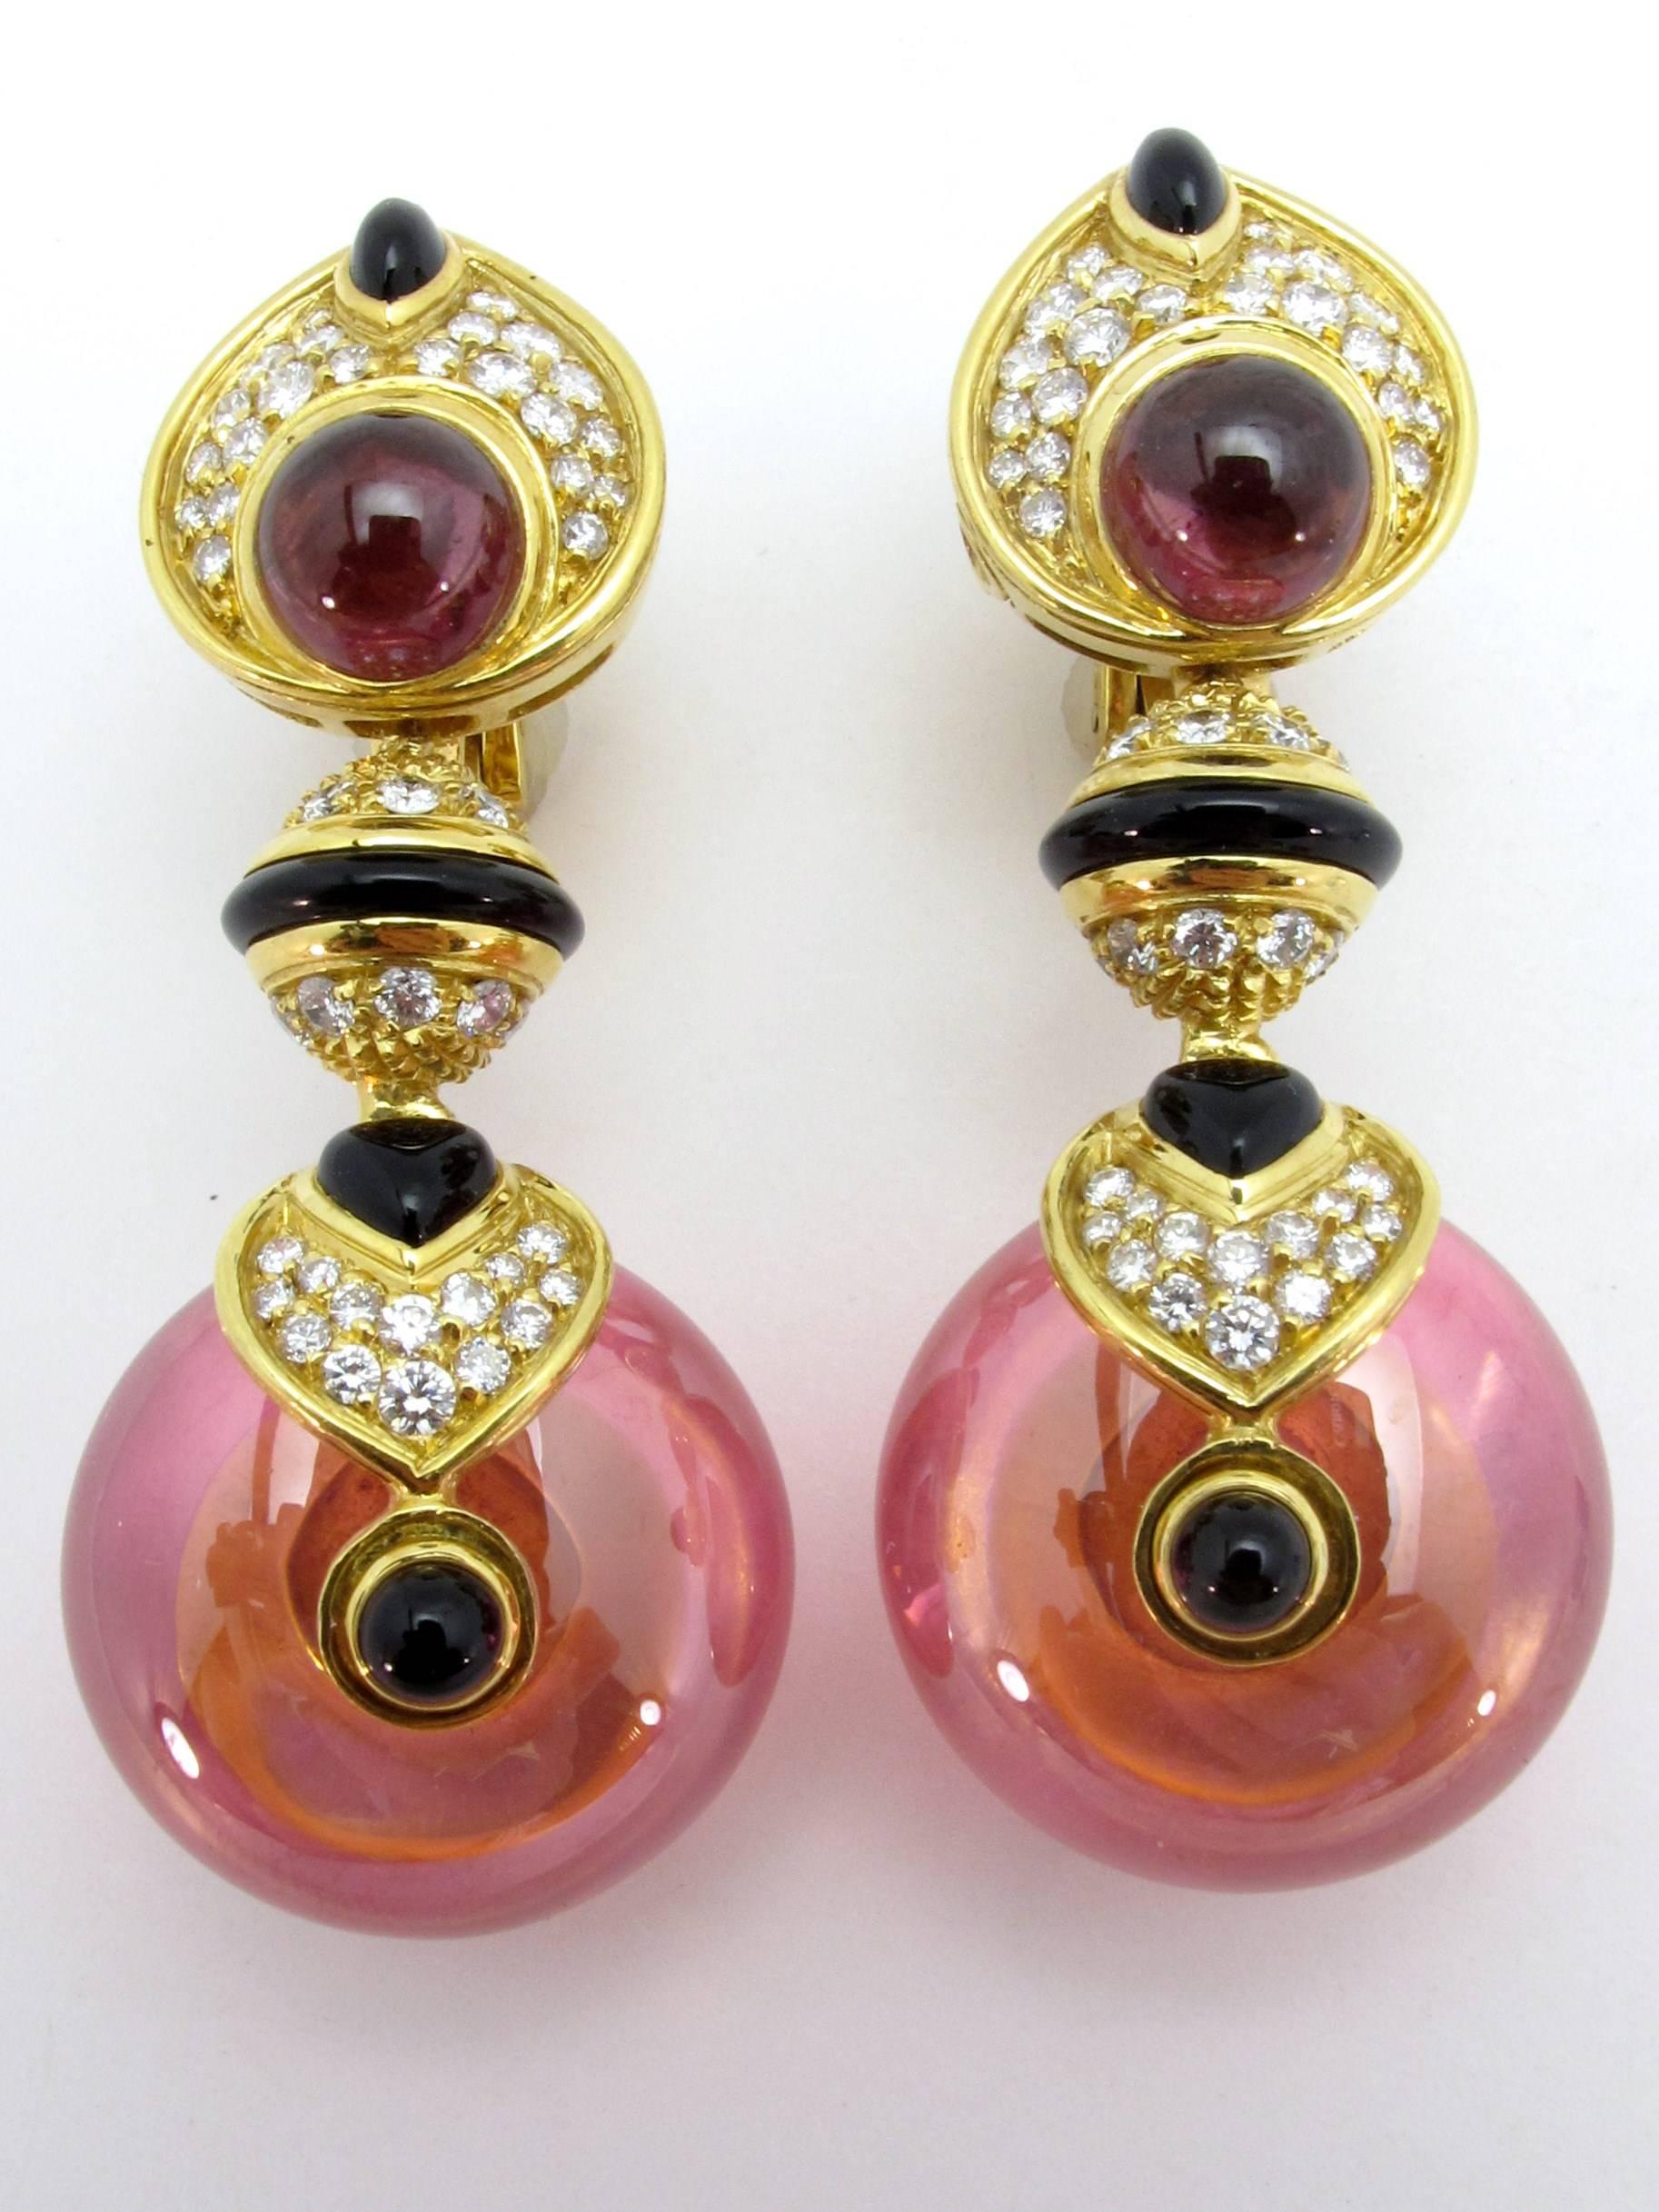 A pair of 18kt yellow gold diamond, tourmaline and onyx drop earrings with interchangeable blue or pink crystal drops. Includes box and screw, signed Marina B.